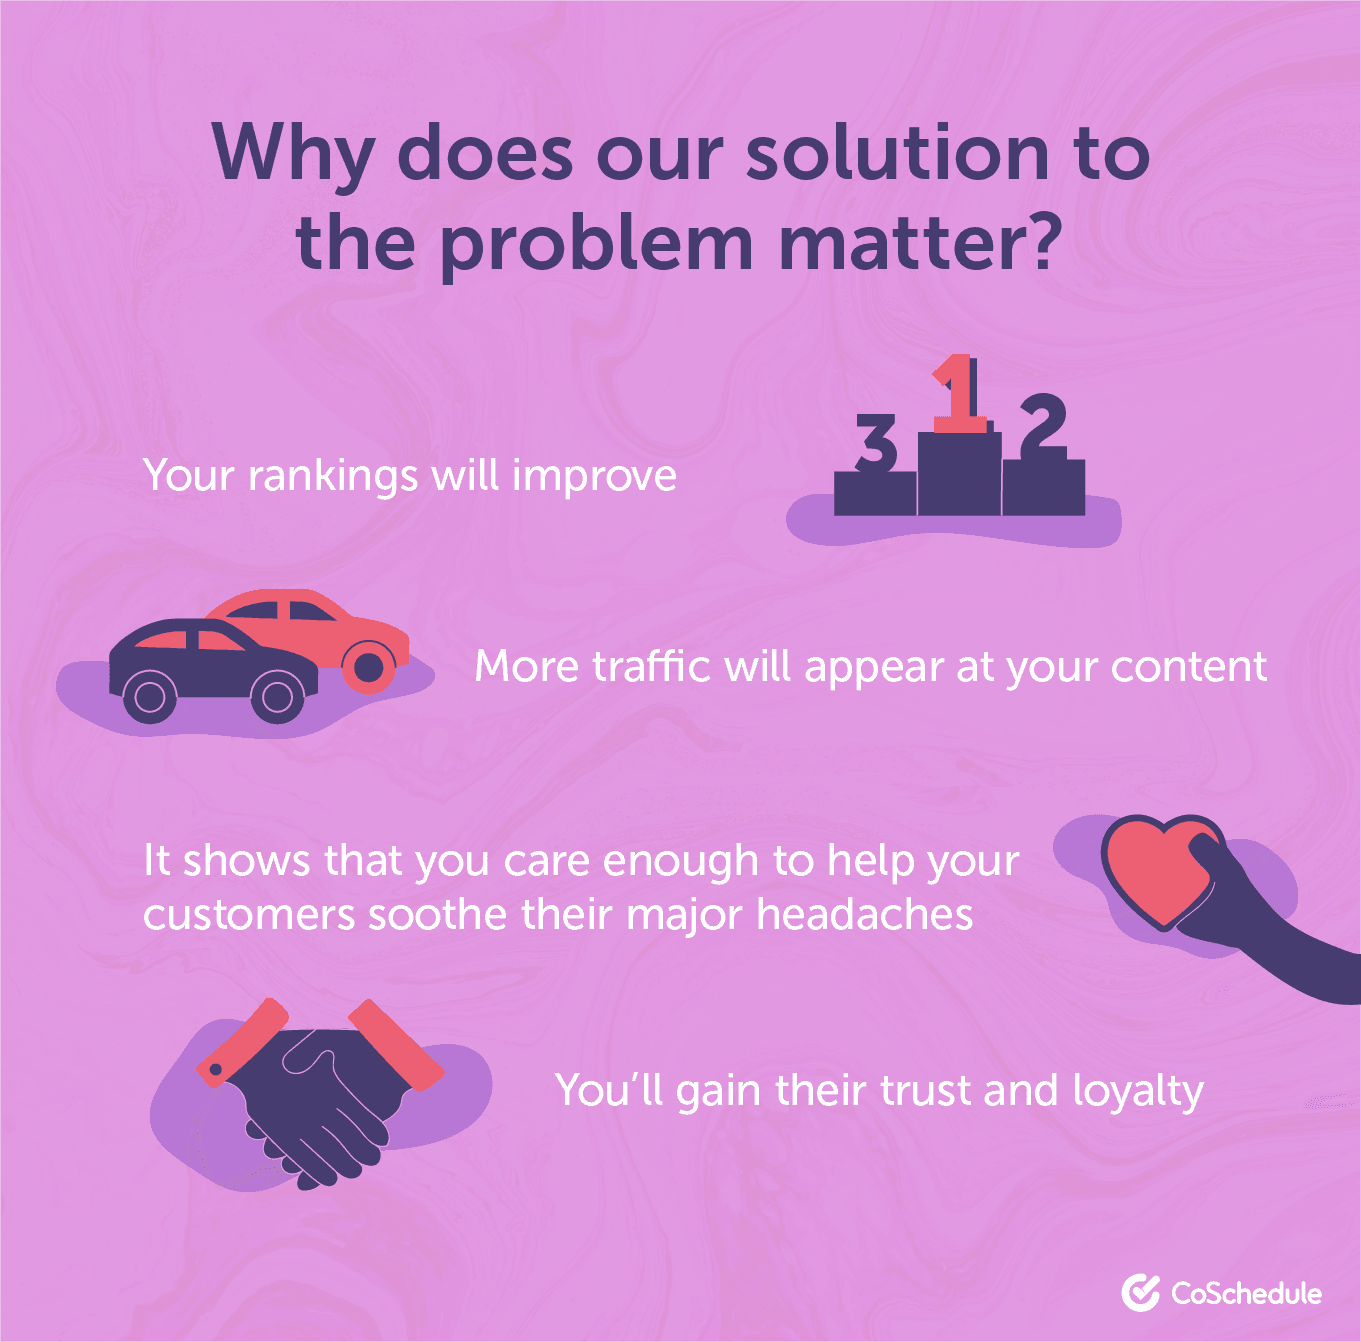 Why does our solution matter?